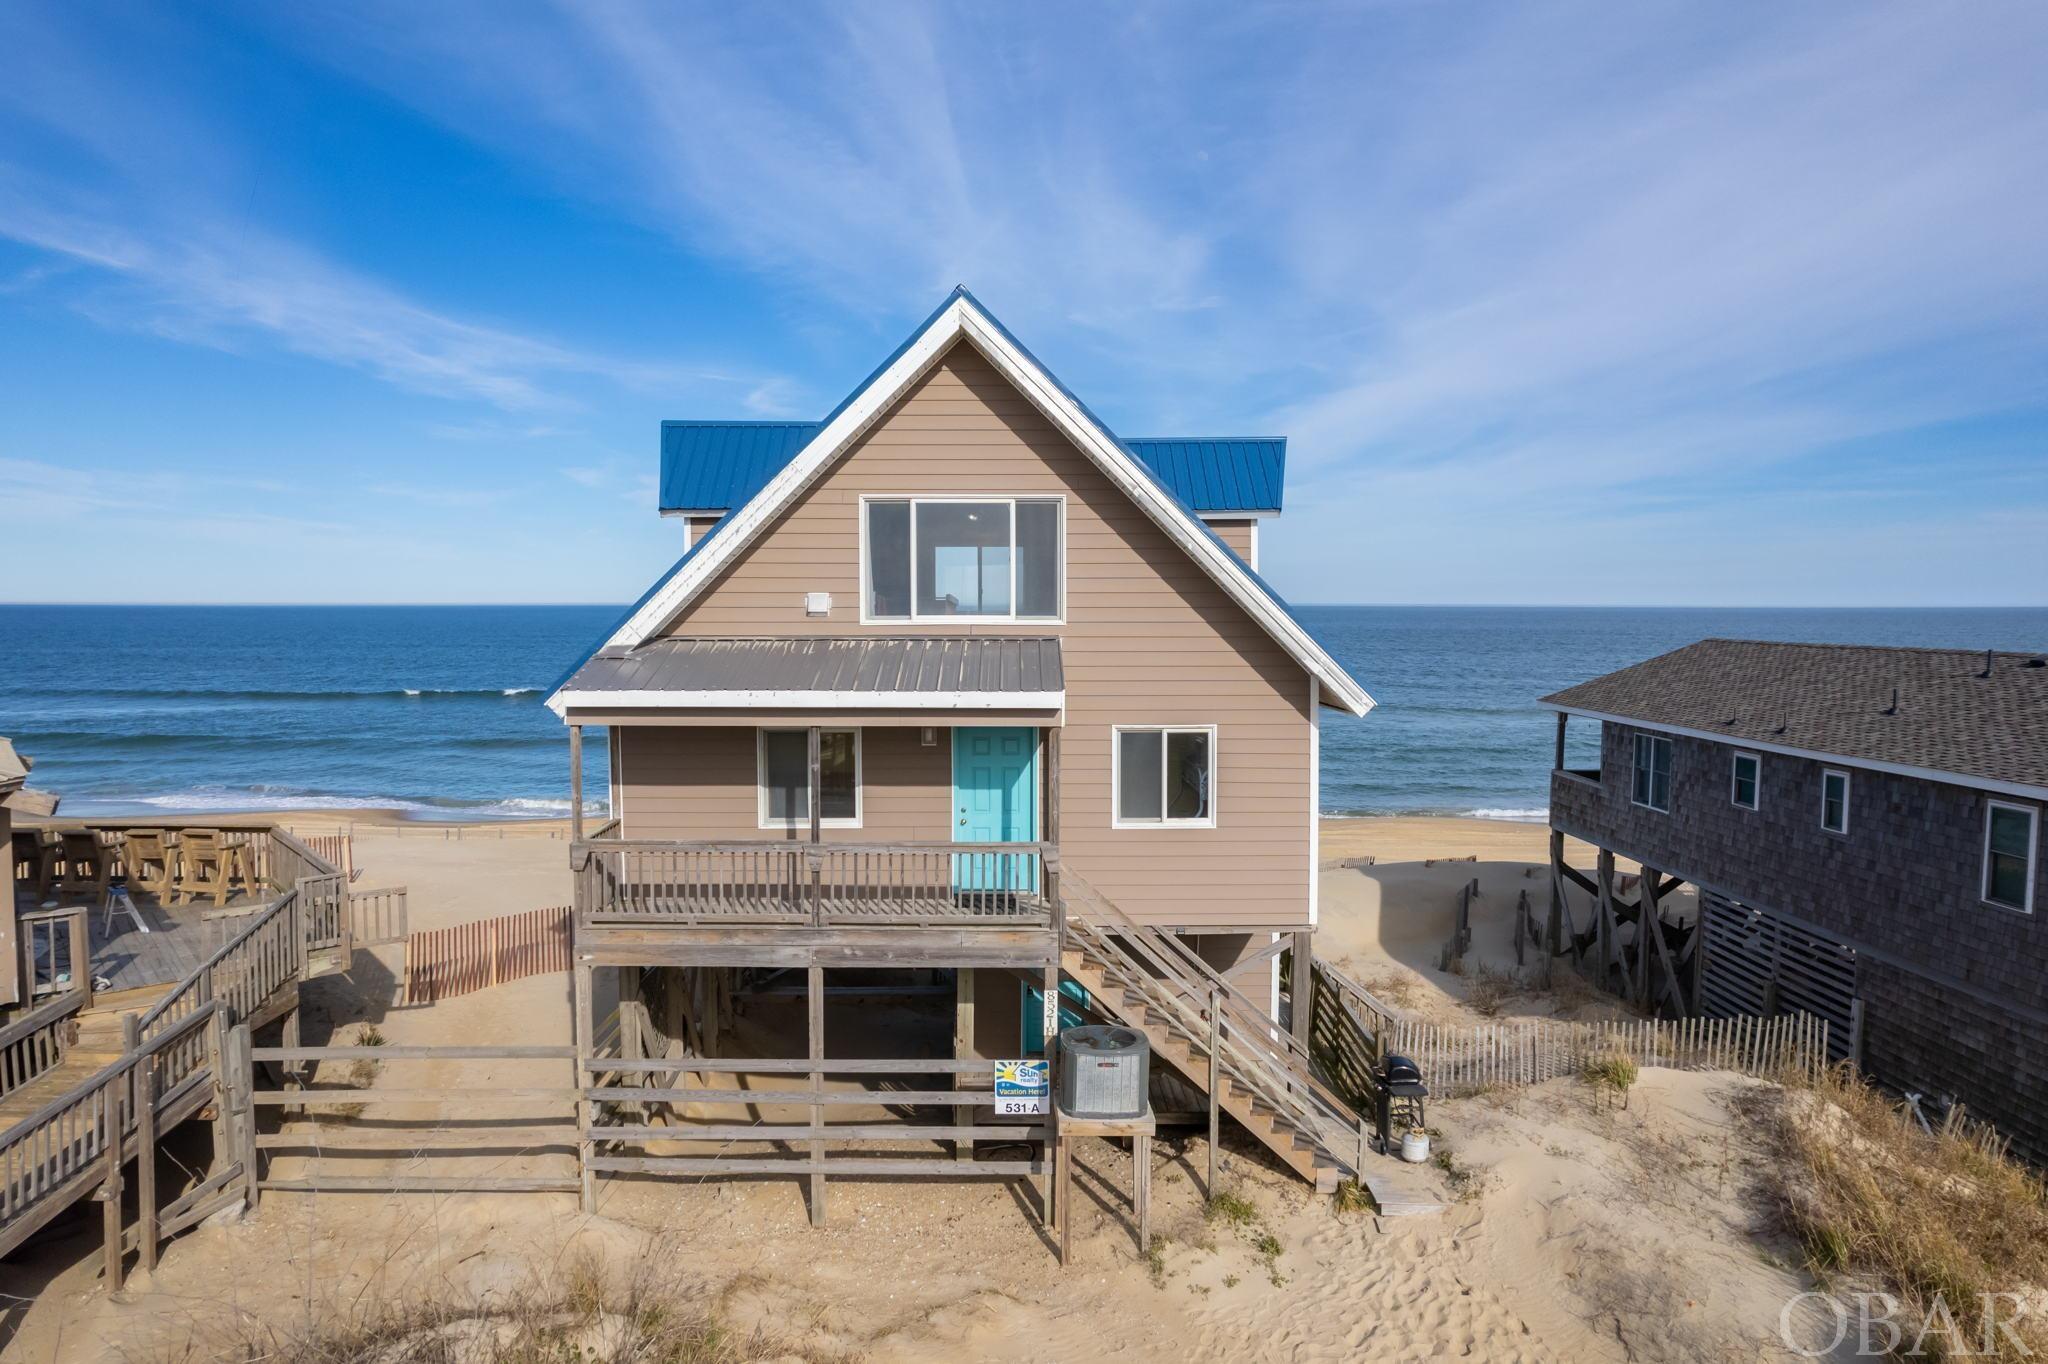 Classic Nags Head oceanfront vacation property with growing 2024 rental income available!  Enjoy gorgeous ocean views at this 3 bedroom/ 2 bath cottage located on a cul-de-sac street close to Jennette’s Pier and the Outer Banks Fishing Pier.   The main floor features an open kitchen/dining/family room area- all with those captivating ocean views- and an expansive oceanfront deck which provides an unobstructed view up and down the beach making this property a favorite with vacation guests.  The spacious open floor plan boasts easy care flooring, warm wood tones, oversized windows, and plenty of space for the whole family.  Two guest bedrooms, a full bath, and the pantry/laundry area are also conveniently located on this level.   The upper level primary en Suite is a private oasis unto itself.  The large windows, private full bath, spacious sitting area, balcony, and spectacular ocean views set the stage for relaxation and tranquility. Well maintained, this home has Everlast Siding with a wind rating of 160 mph, a metal roof and LVP Lifeproof flooring (mid-level 2022), new family room furniture (2022) and a new (2020) HVAC.  There is nothing that a buyer would need to do to jump into the rental season.  This vacation rental has wide appeal due to its oceanfront location and proximity to local shopping, restaurants, and attractions.